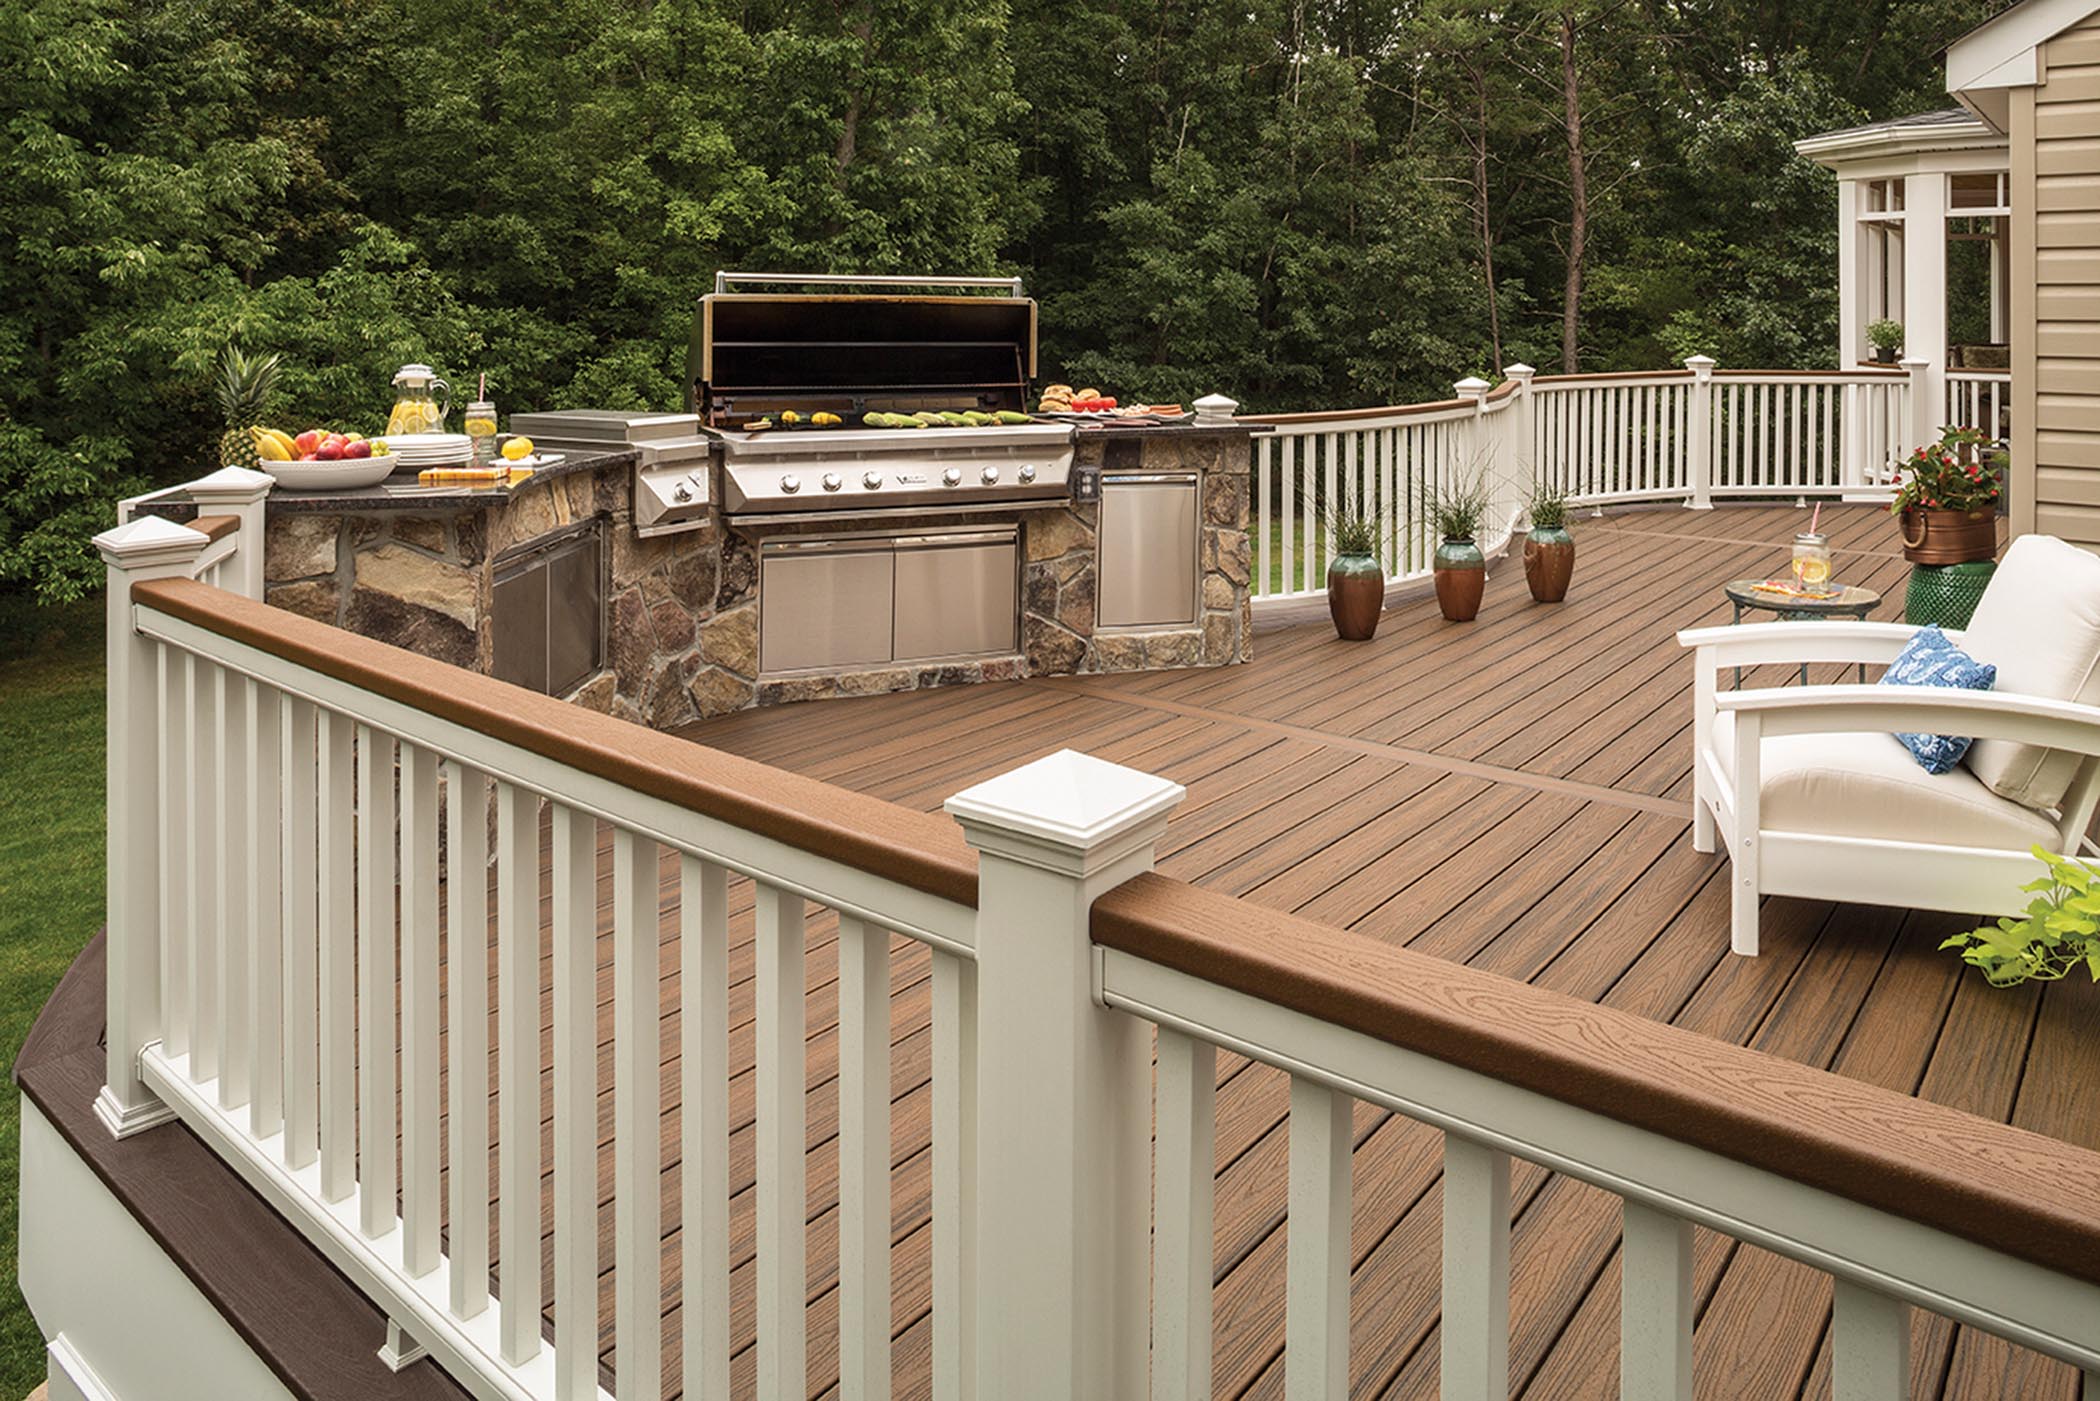 Composite decking Liverpool, Is It Really a Valuable Addition to your Home?